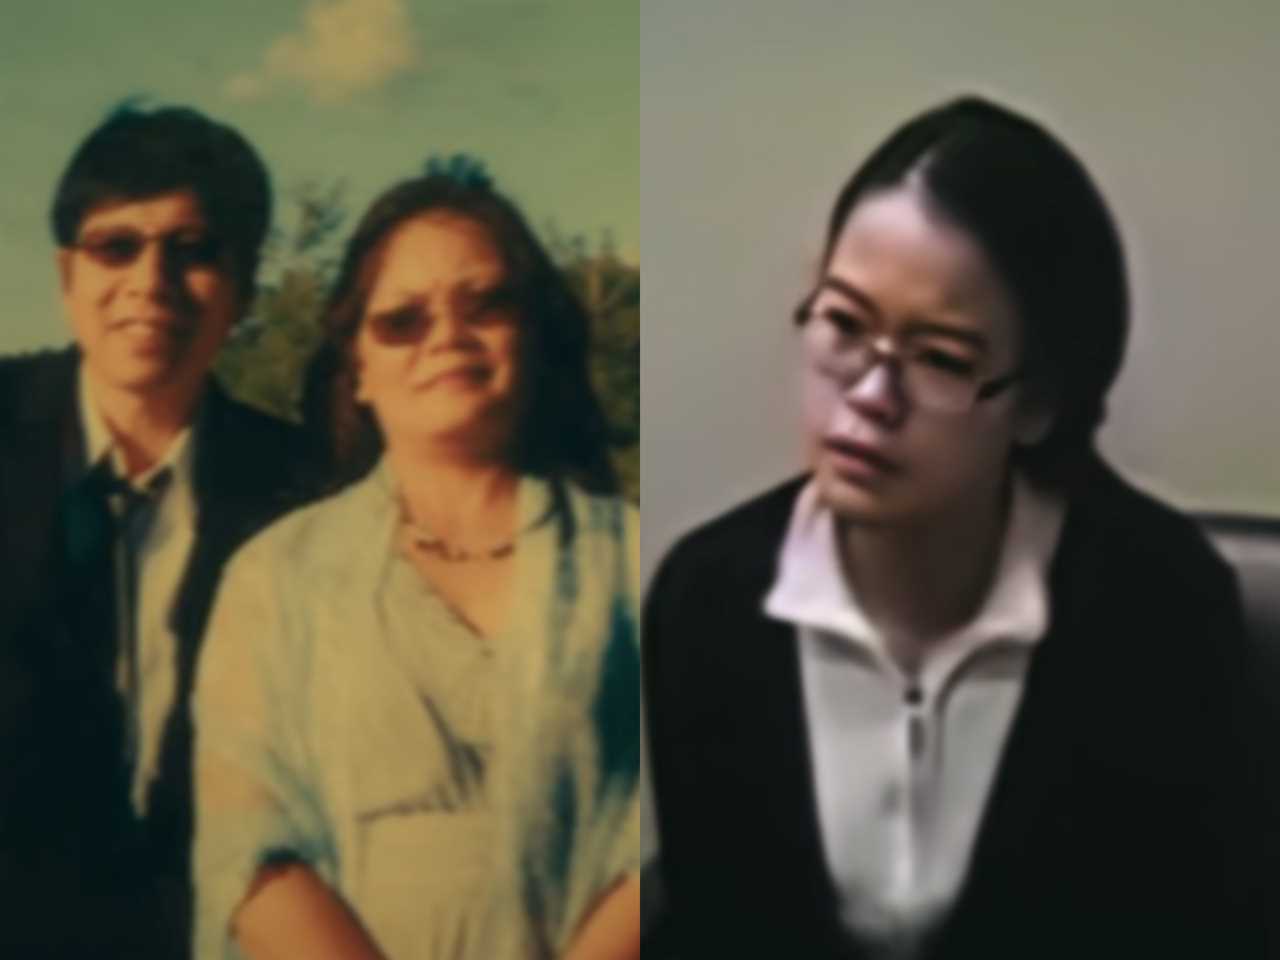 left: hann pan and bich ha pann, two people dressed in nice clothes and posing outside in sunglasses; right: jennifer pan, in footage from police interviews, with her hair pulled back, glasses, and a white shirt and black cardigan